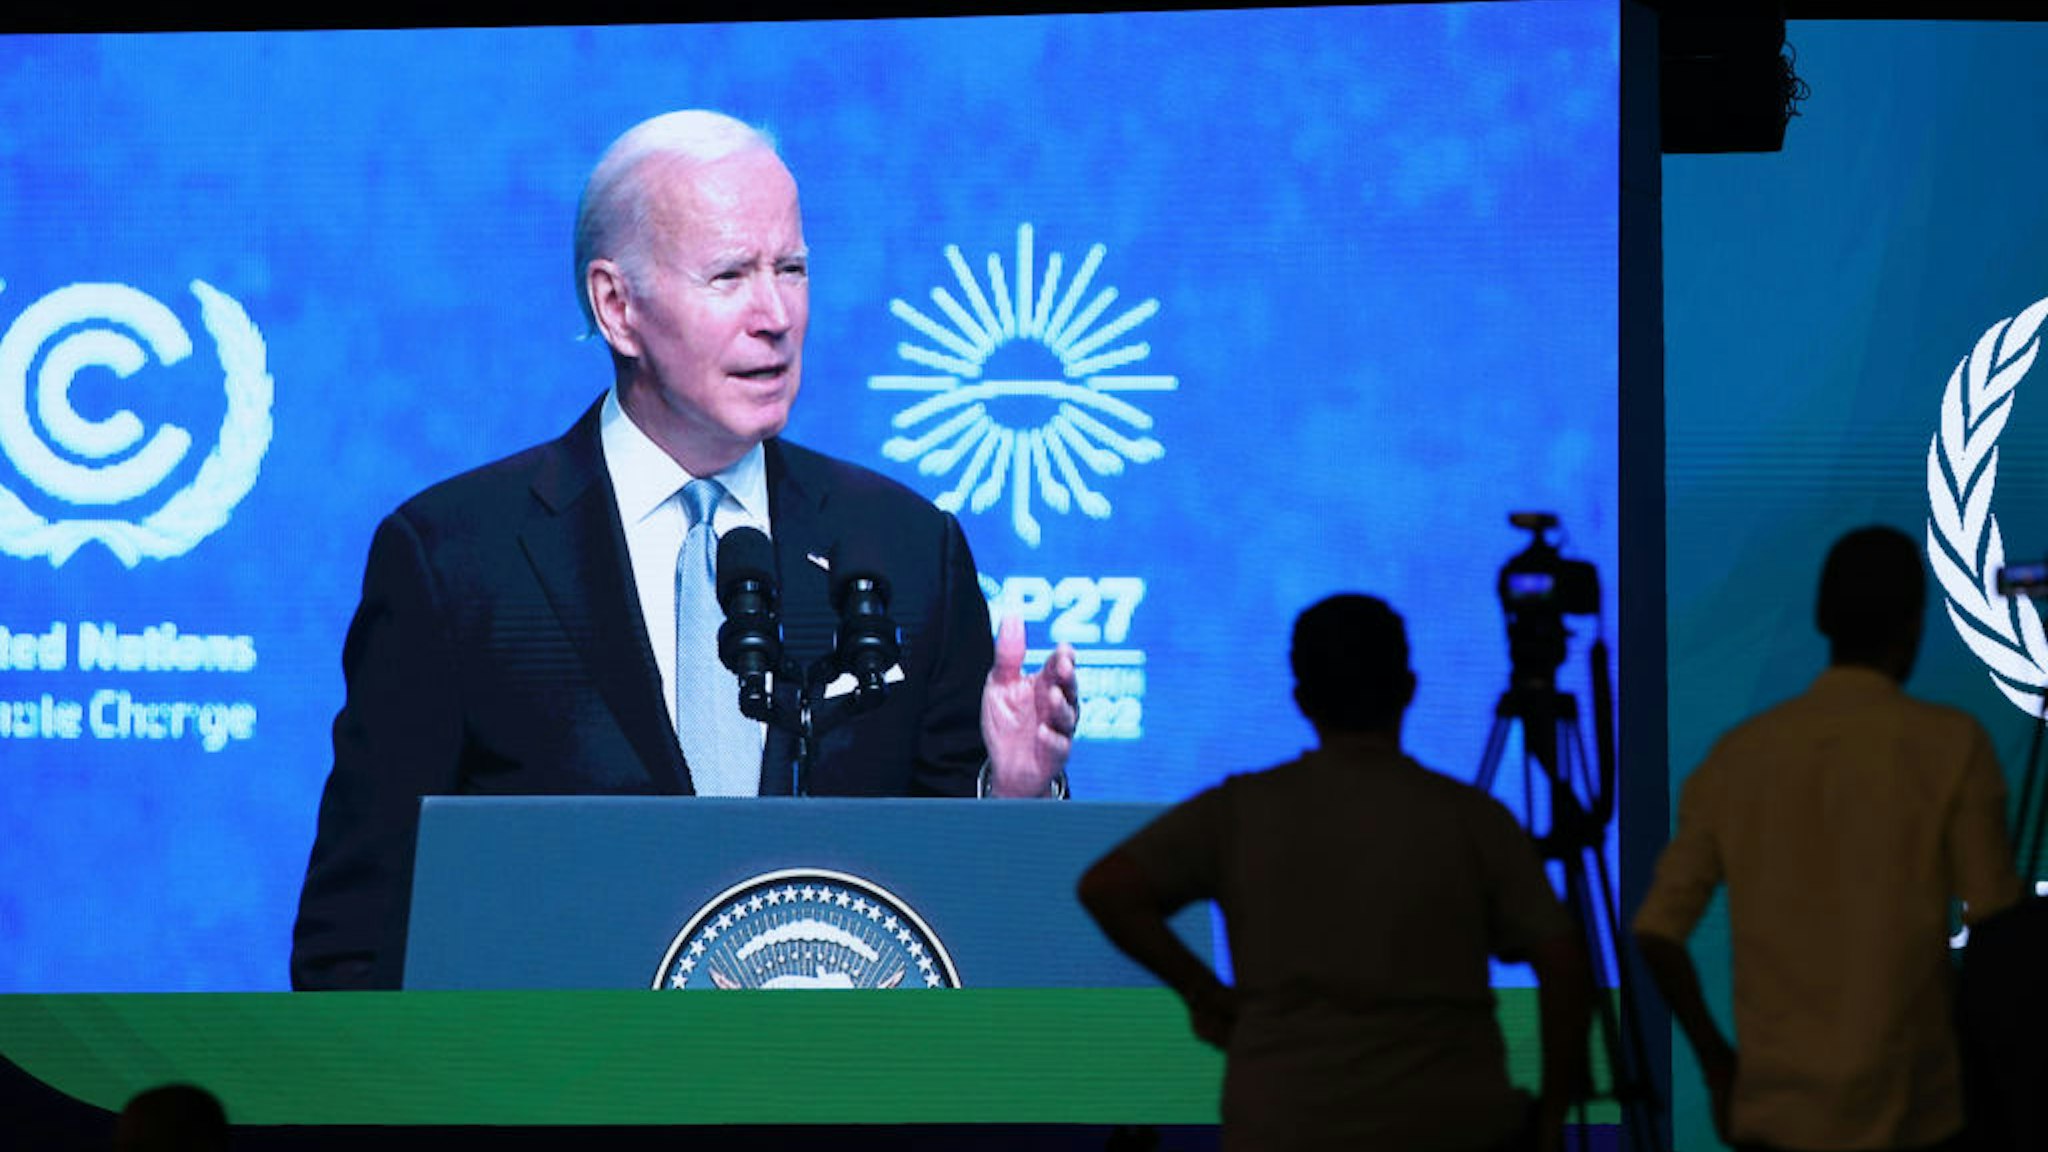 SHARM EL SHEIKH, EGYPT - NOVEMBER 11: U.S. President Joe Biden is seen on a large-screen video monitor as he speaks at the UNFCCC COP27 climate conference on November 11, 2022 in Sharm El Sheikh, Egypt. The conference is bringing together political leaders and representatives from 190 countries to discuss climate-related topics including climate change adaptation, climate finance, decarbonisation, agriculture and biodiversity. The conference is running from November 6-18. (Photo by Sean Gallup/Getty Images)